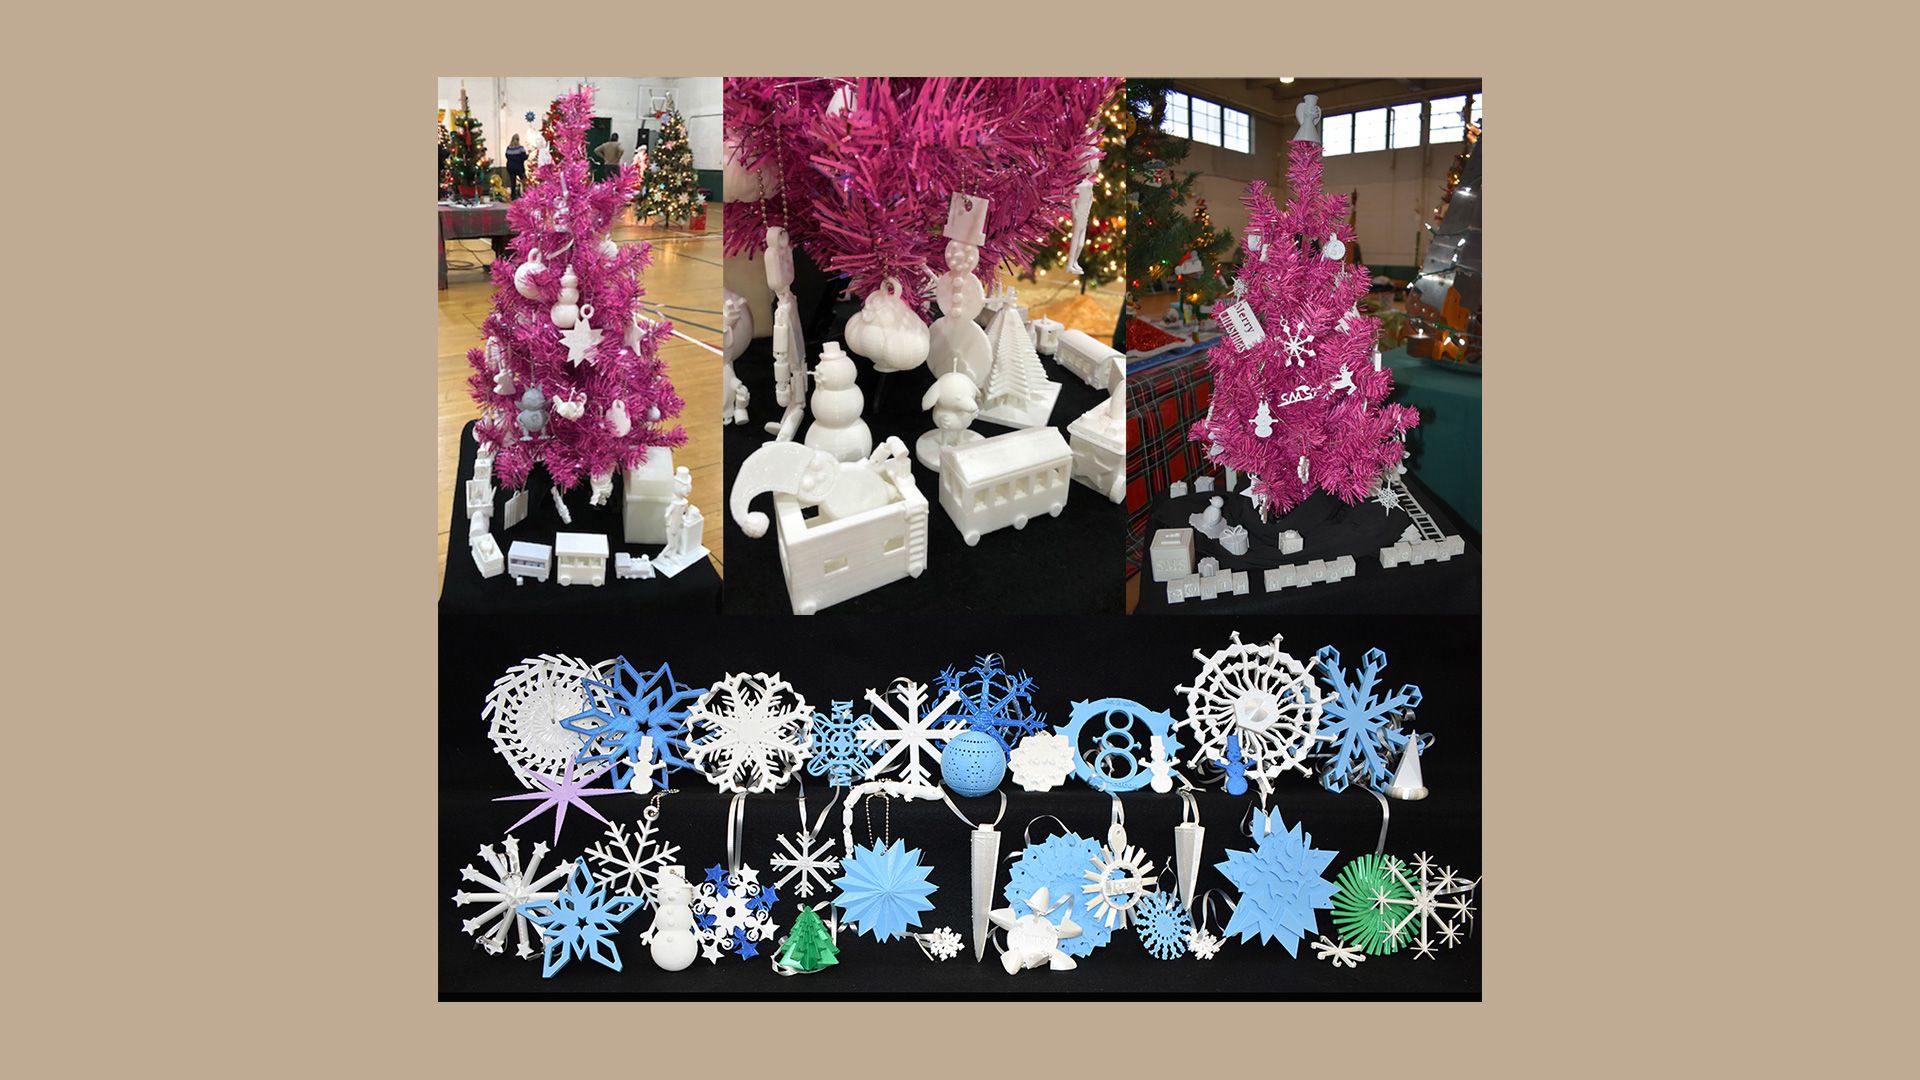 A range of 3D printed ornaments, including snowflakes and Christmas decorations.